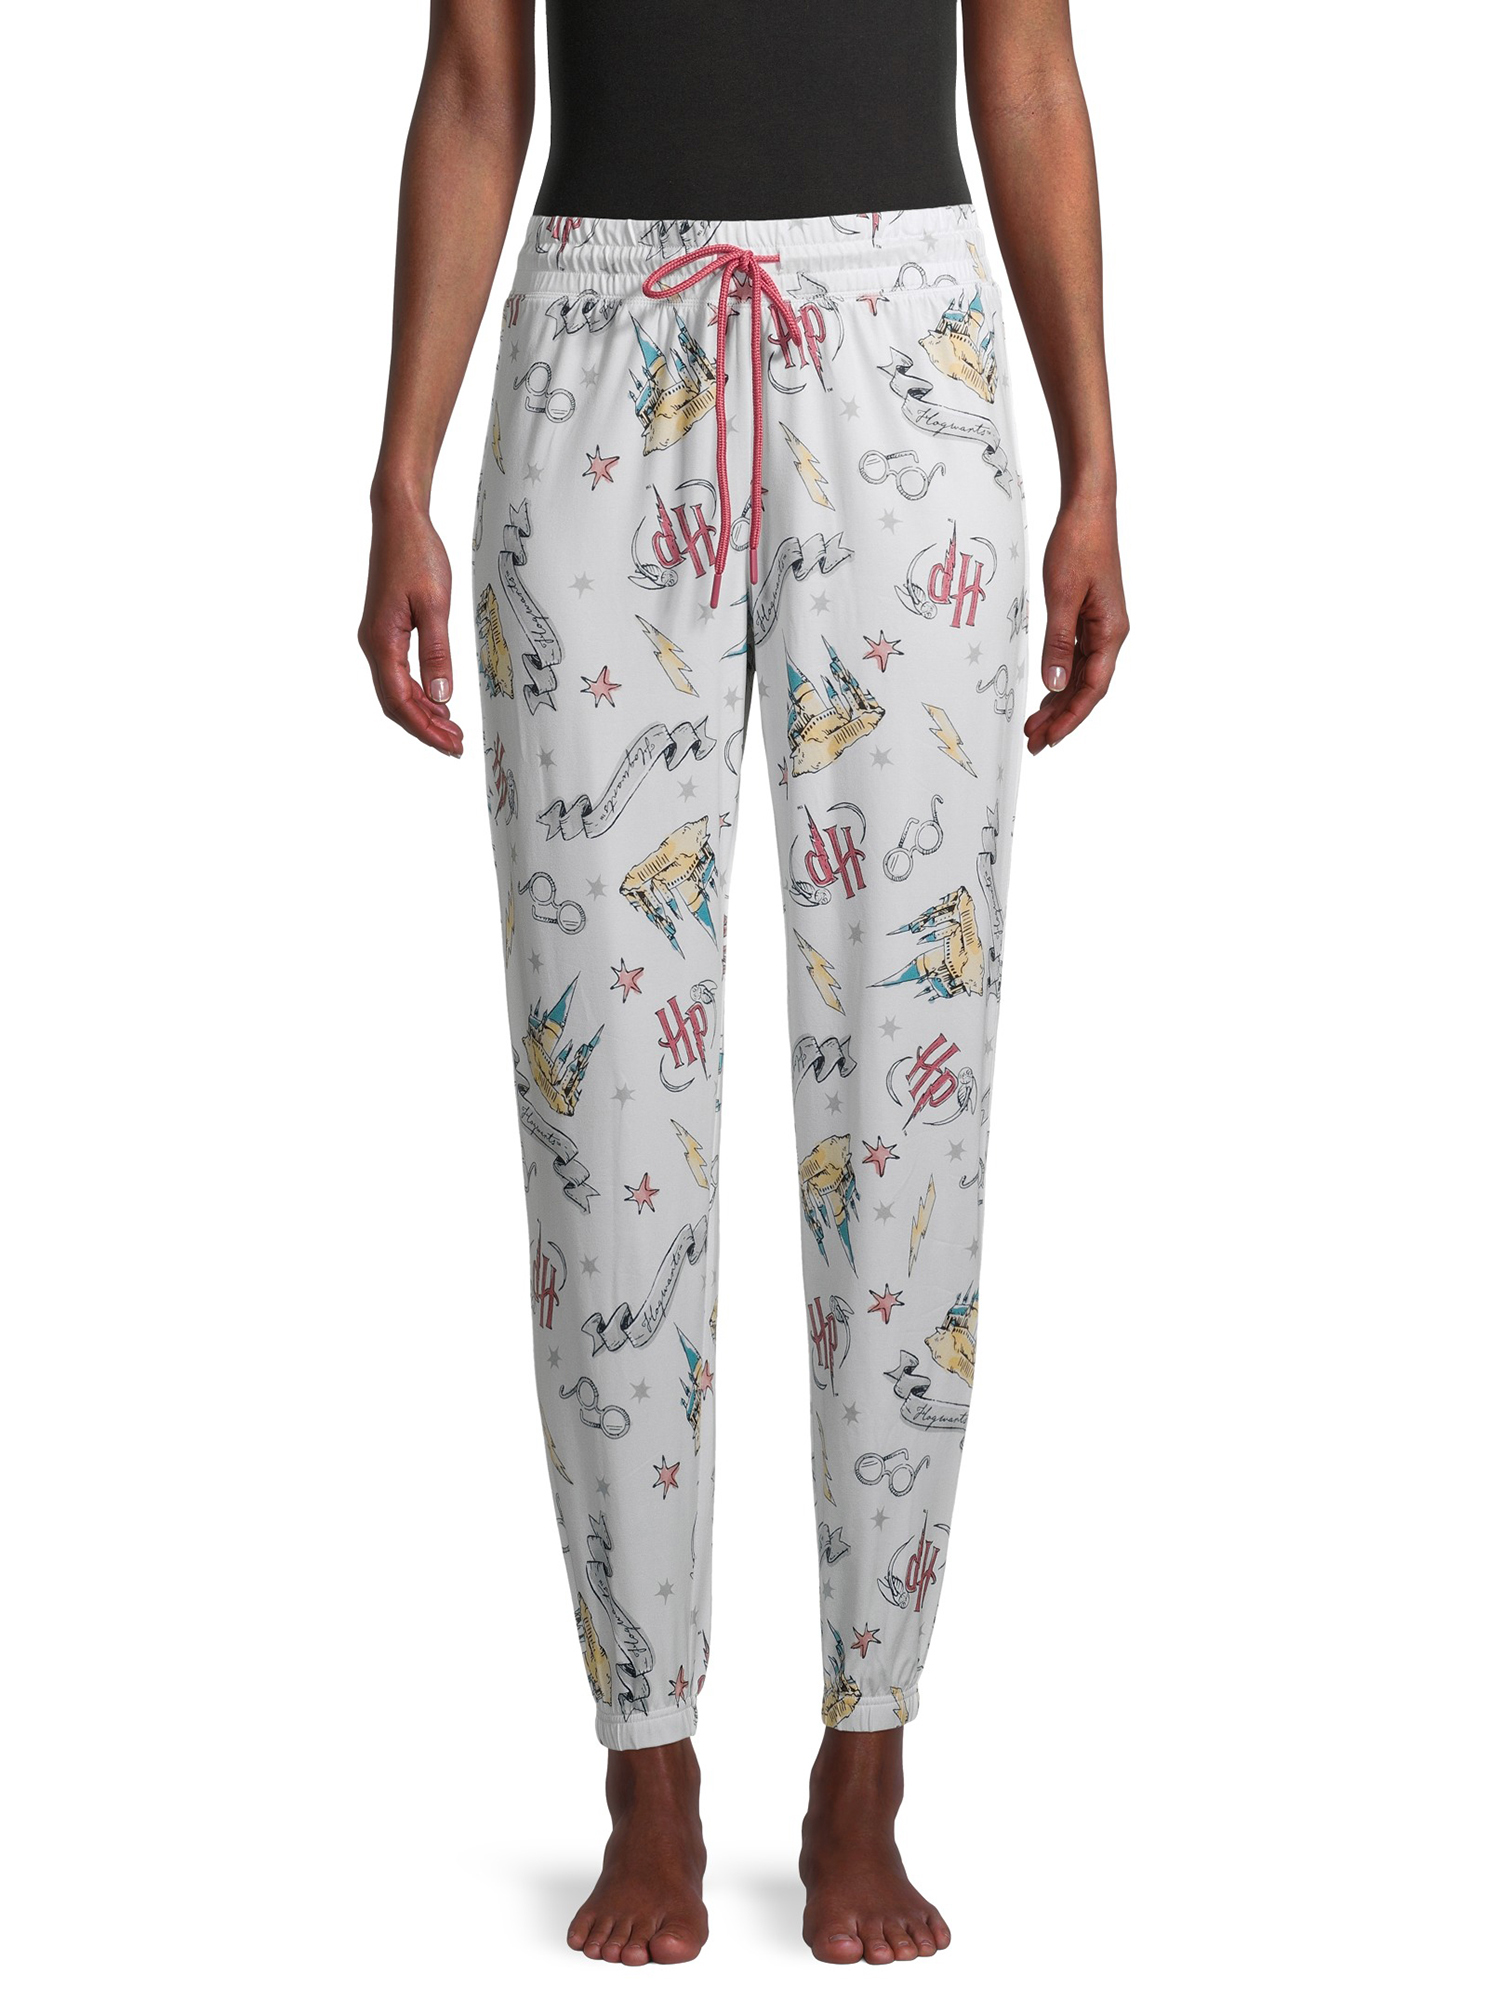 Womens and Women's Jogger Pant - Harry Potter - image 1 of 6